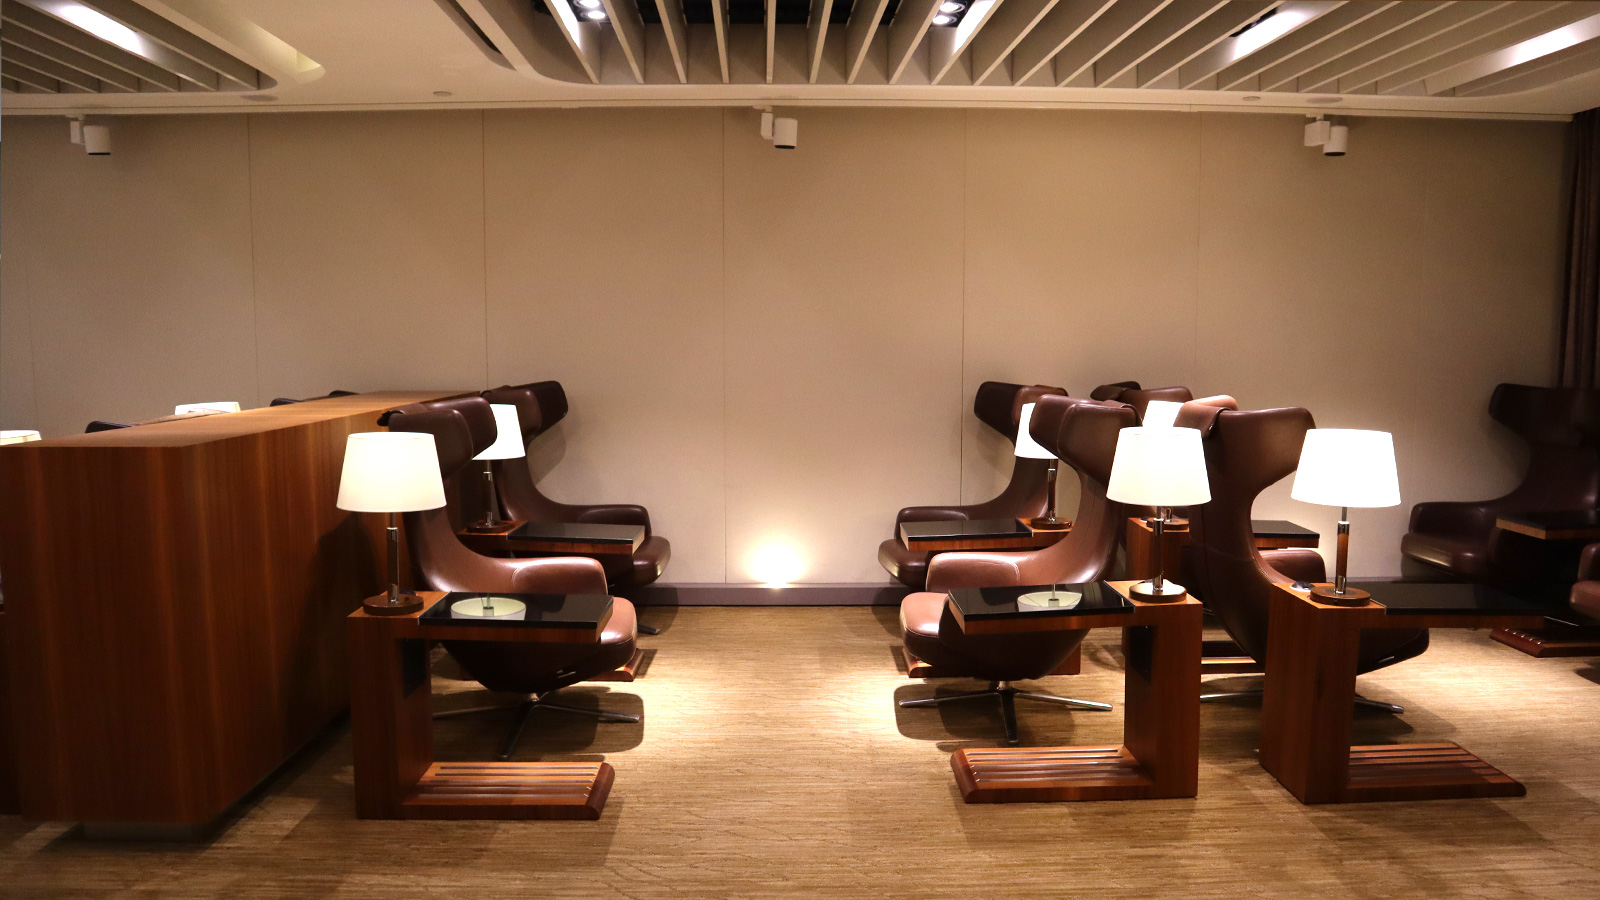 Cluster seats in Singapore Airlines SilverKris First Class Lounge in Melbourne